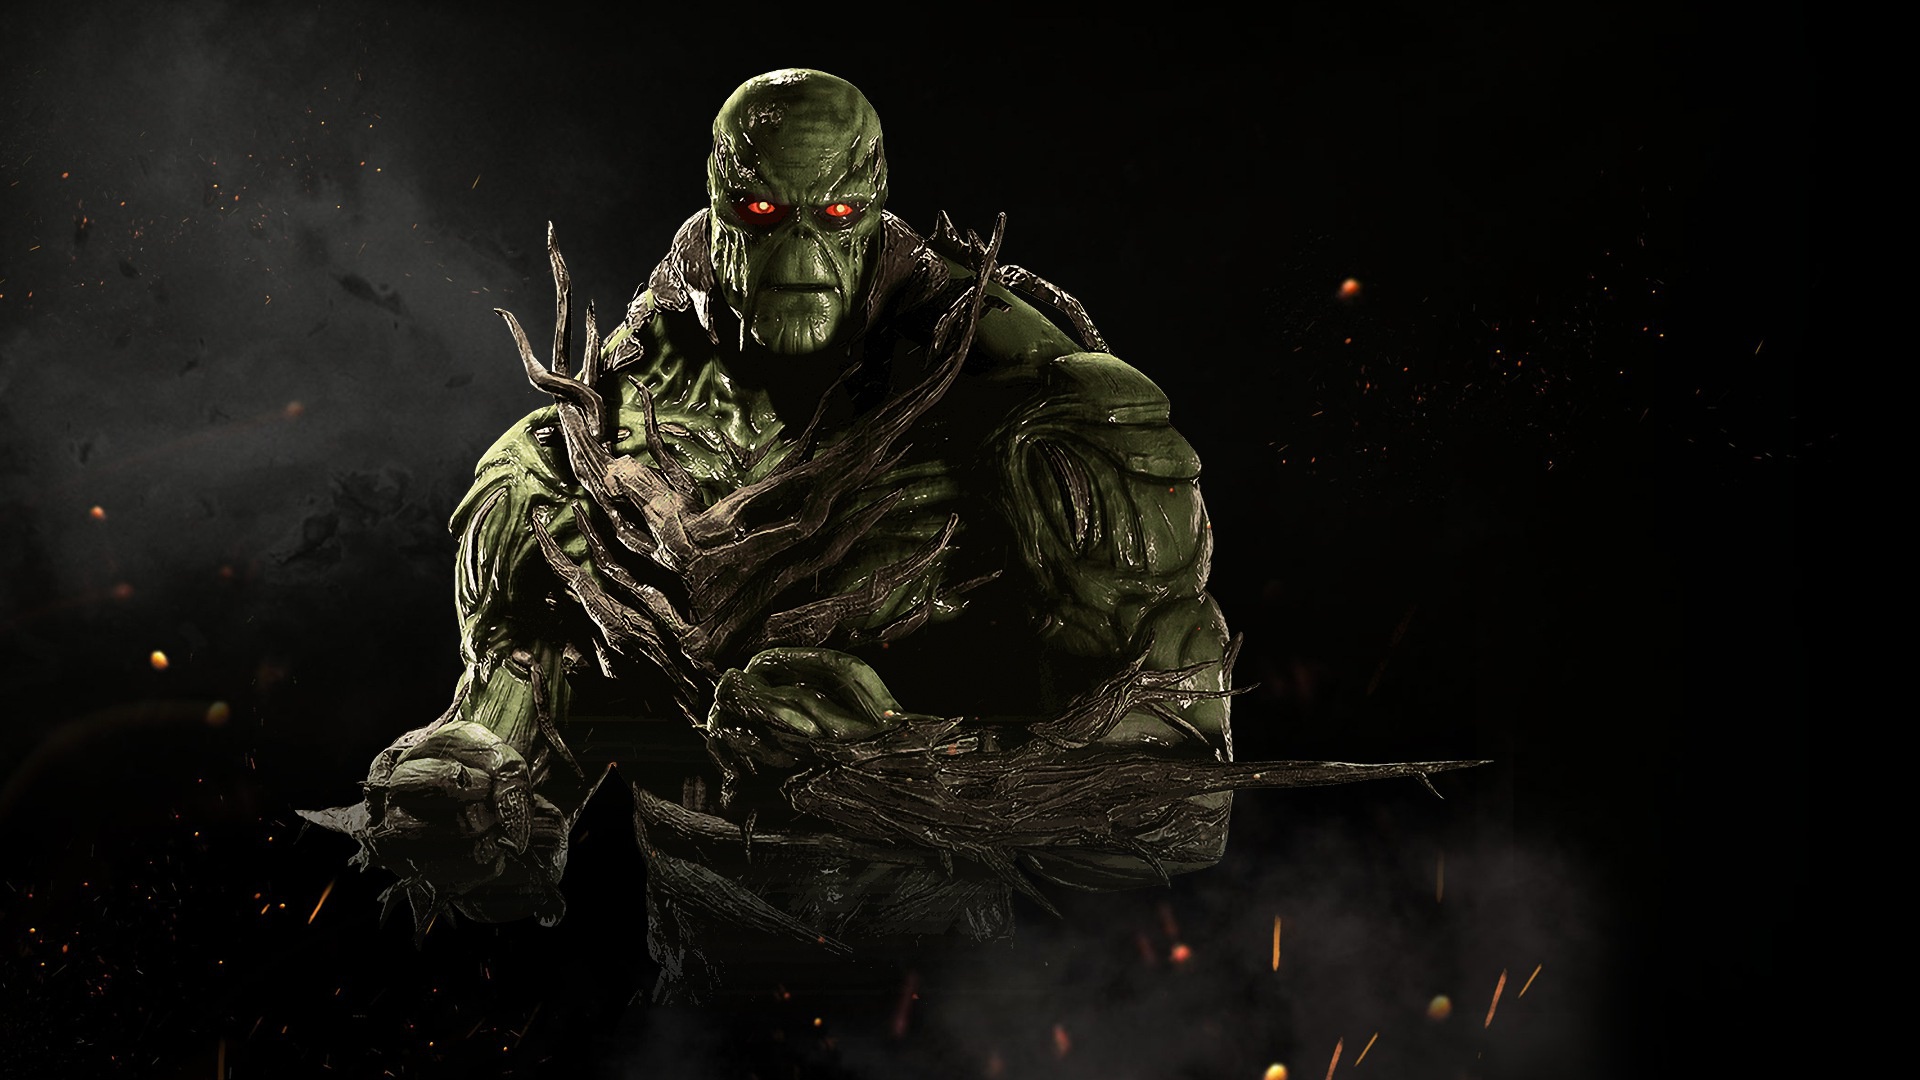 injustice 2, video game, swamp thing, injustice